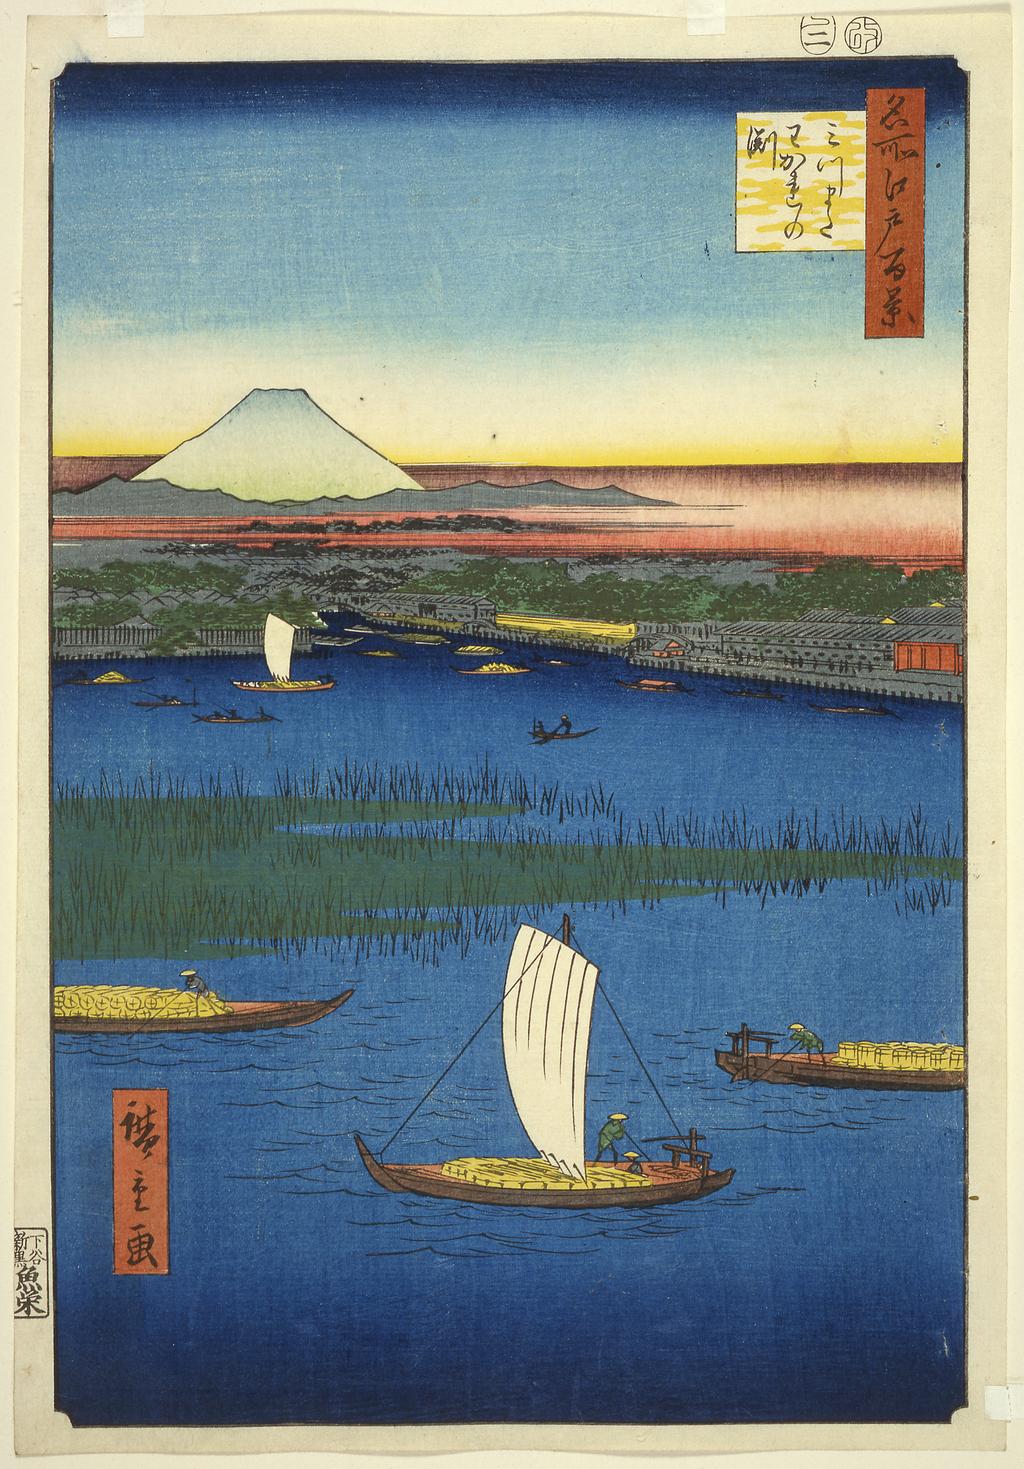 An image of Mitsumata Wakarenofuchi  (Island off the mouth of the Sumida river). Hiroshige, Utagawa (Japanese, 1797-1858). Colour print from woodblocks. Ôban. Signed: Hiroshige ga. Publisher: Uoei (Uoya Eikichi). Date seal: Snake 2 (2/1857). Censor’s seal: aratame. 1857. Ukiyo-e. Notes: No. 57 from the series Meisho Edo hyakkei (One hundred famous views of Edo), in the section for Summer. A view from the east bank, near Mannen Bridge, over the widest stretch of the Sumida river towards Mount Fuji. The name Wakarenofuchi - ‘dividing pool’ - referred to the mixture of fresh water and tidal water from Edo Bay (out of the view to the left). In the distance is the entrance to the Hakozaki Canal. The island the left of was filled with the mansions of feudal lords (daimyo). The area in filled with reeds had been the site of an artificial island constructed in the 1770s and forming one of the main pleasure districts of the city until its destruction in 1789 as part of the governments reforms. The boats in the foreground are laden with rice, sake and cotton. An alternative printing has a differently coloured cartouche and red instead of yellow along the top of the clouds.